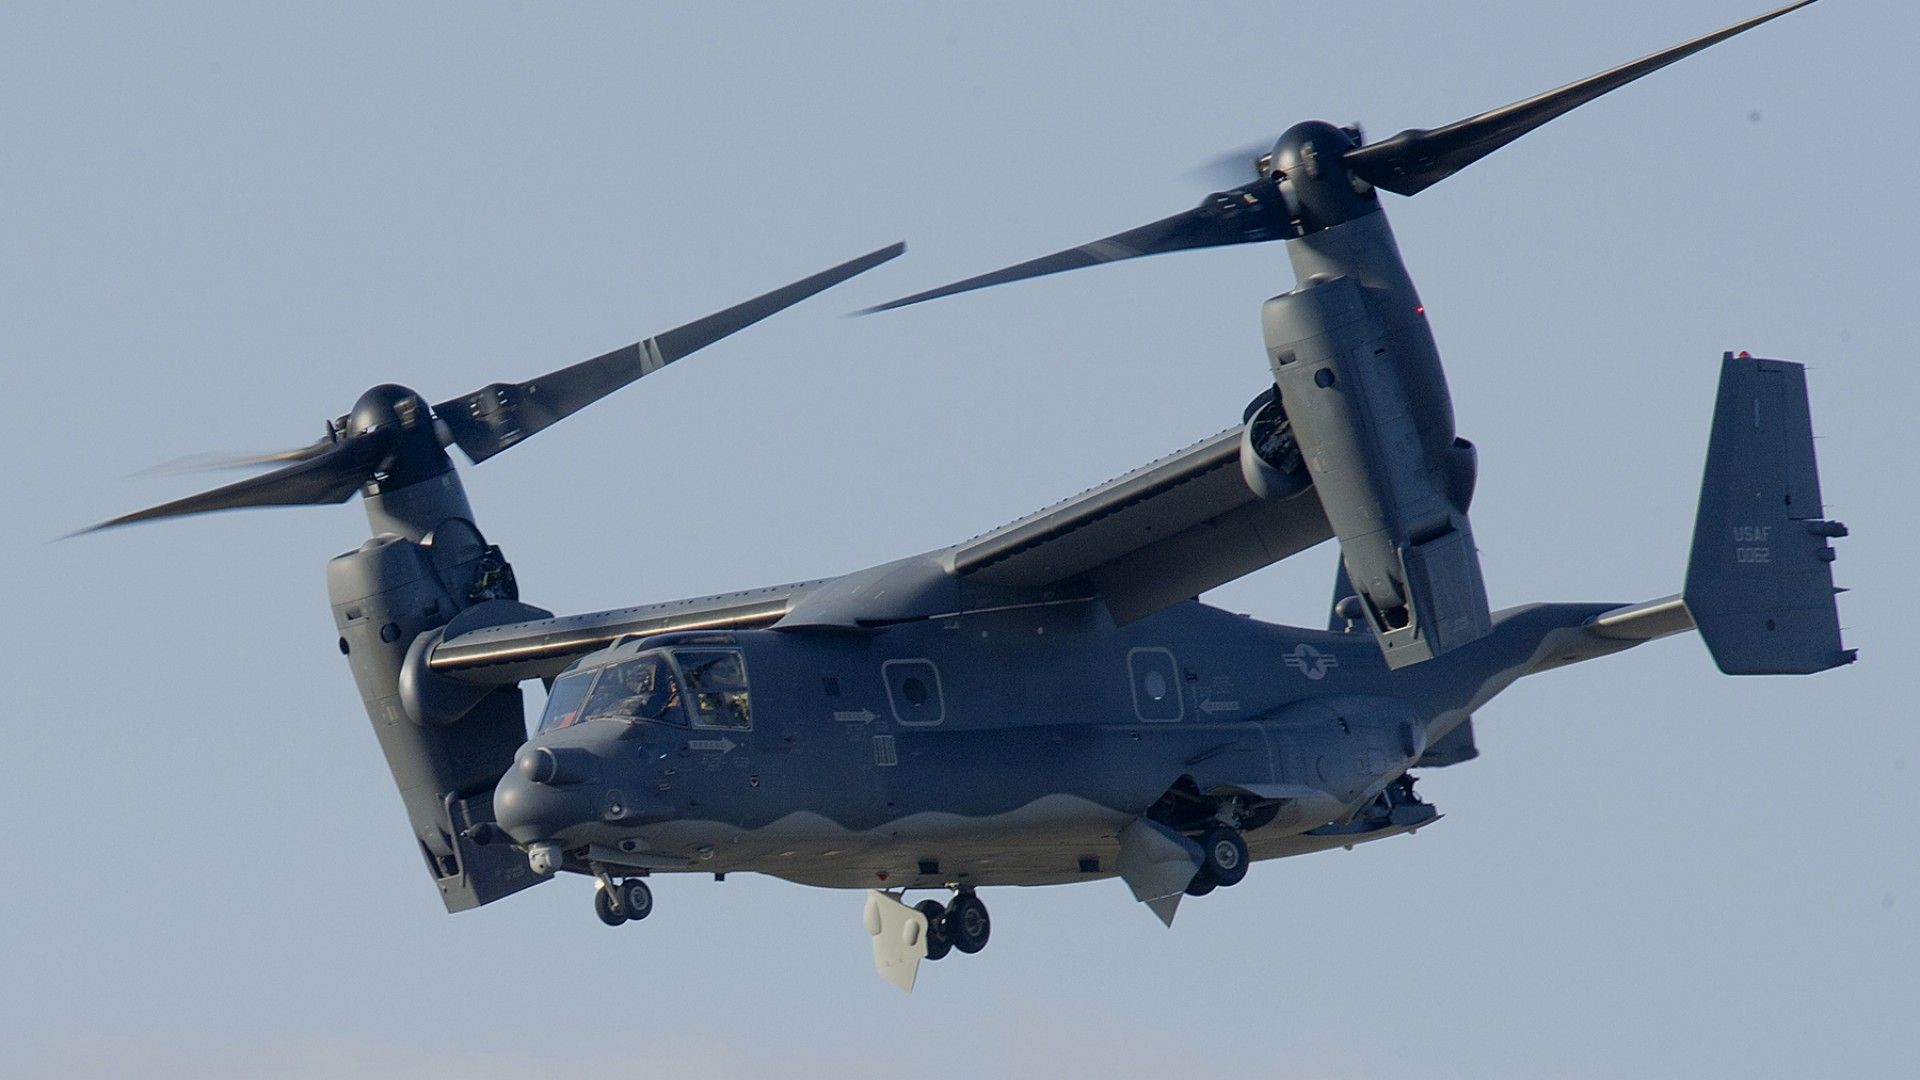 Wallpaper V 22 Osprey, Tiltrotor, Multi Mission Aircraft, Bell, Boeing, US Army, U.S. Air Force, Military